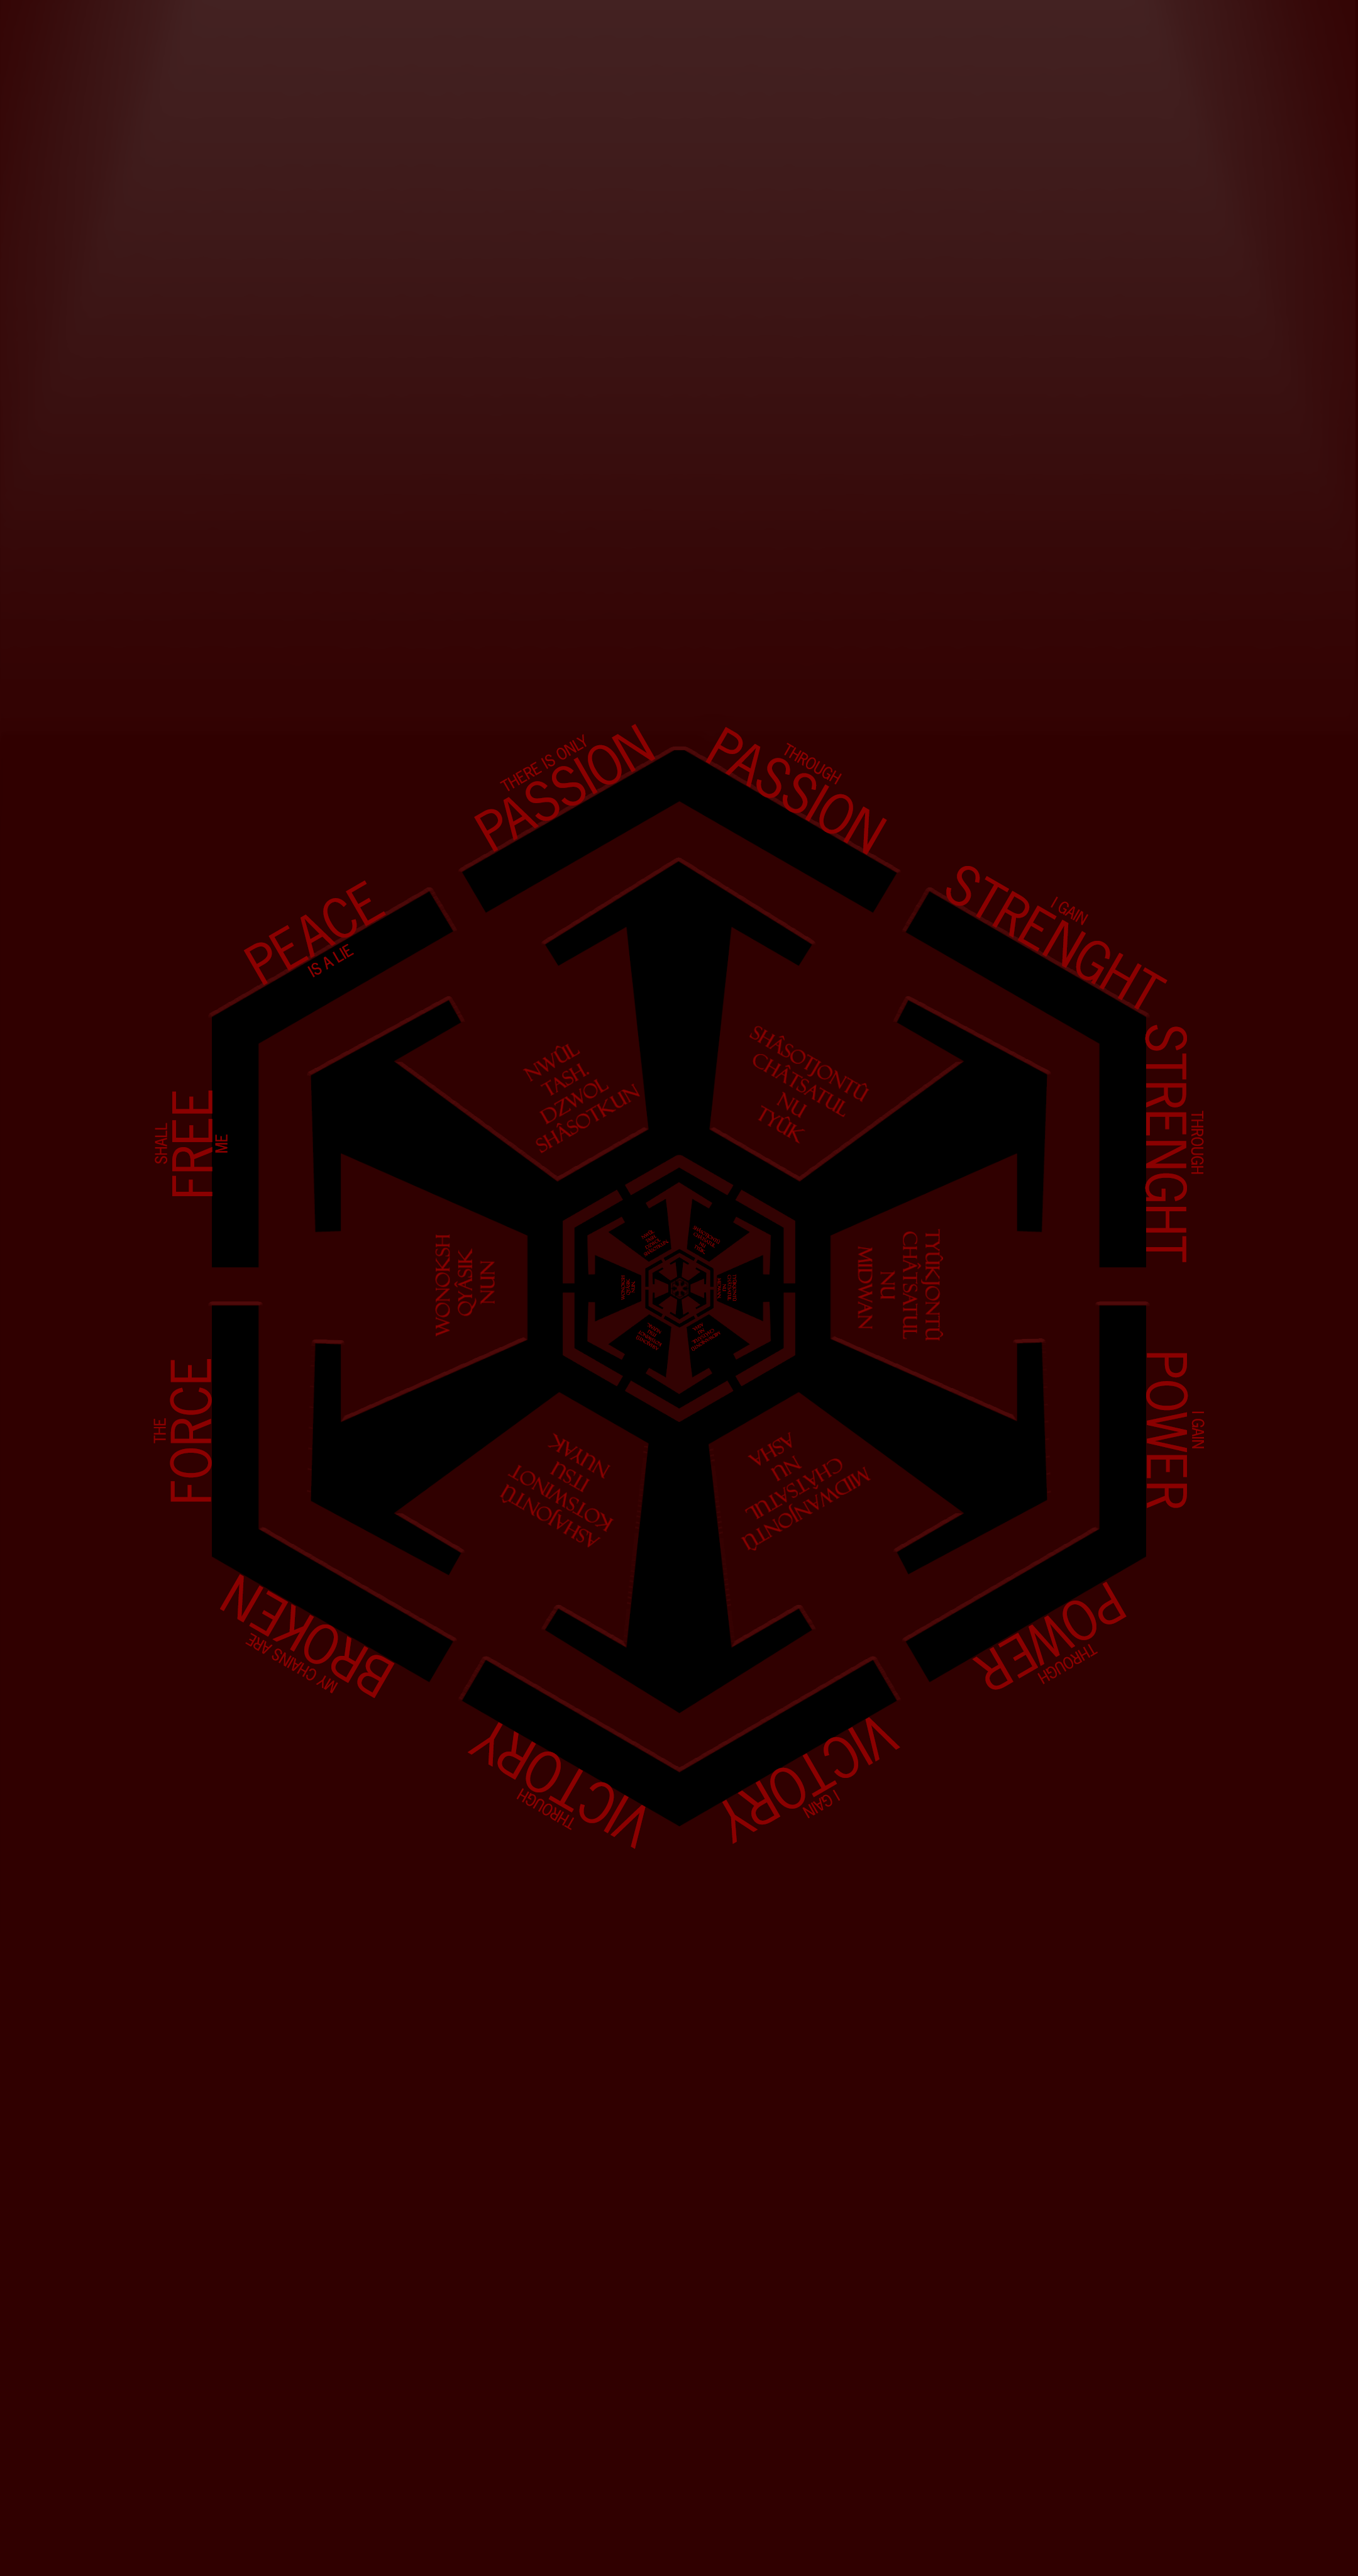 So I Tried To Create A Sith Empire Themed Phone Wallpaper R